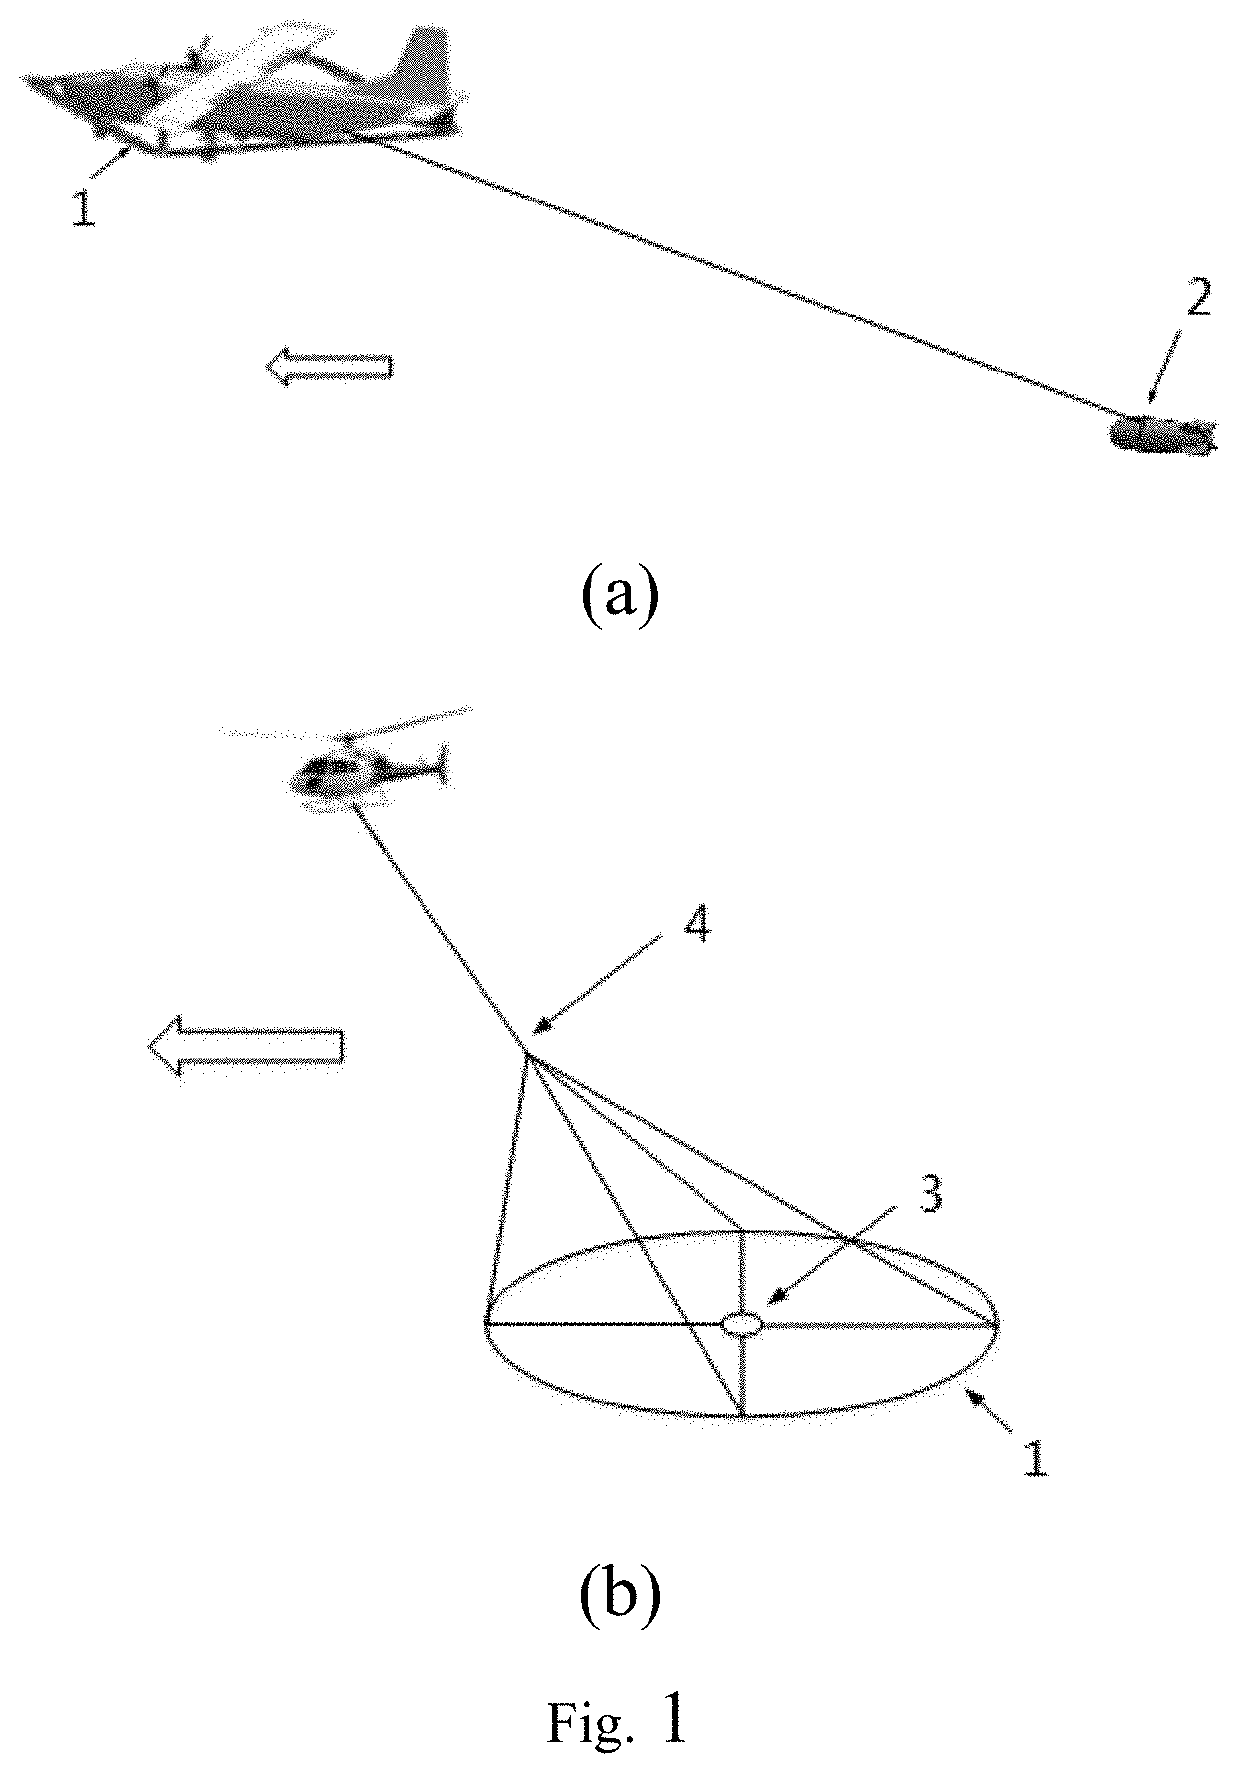 Multi-mode data observation method based on unmanned aerial vehicle formation for semi-airborne electromagnetic surveying